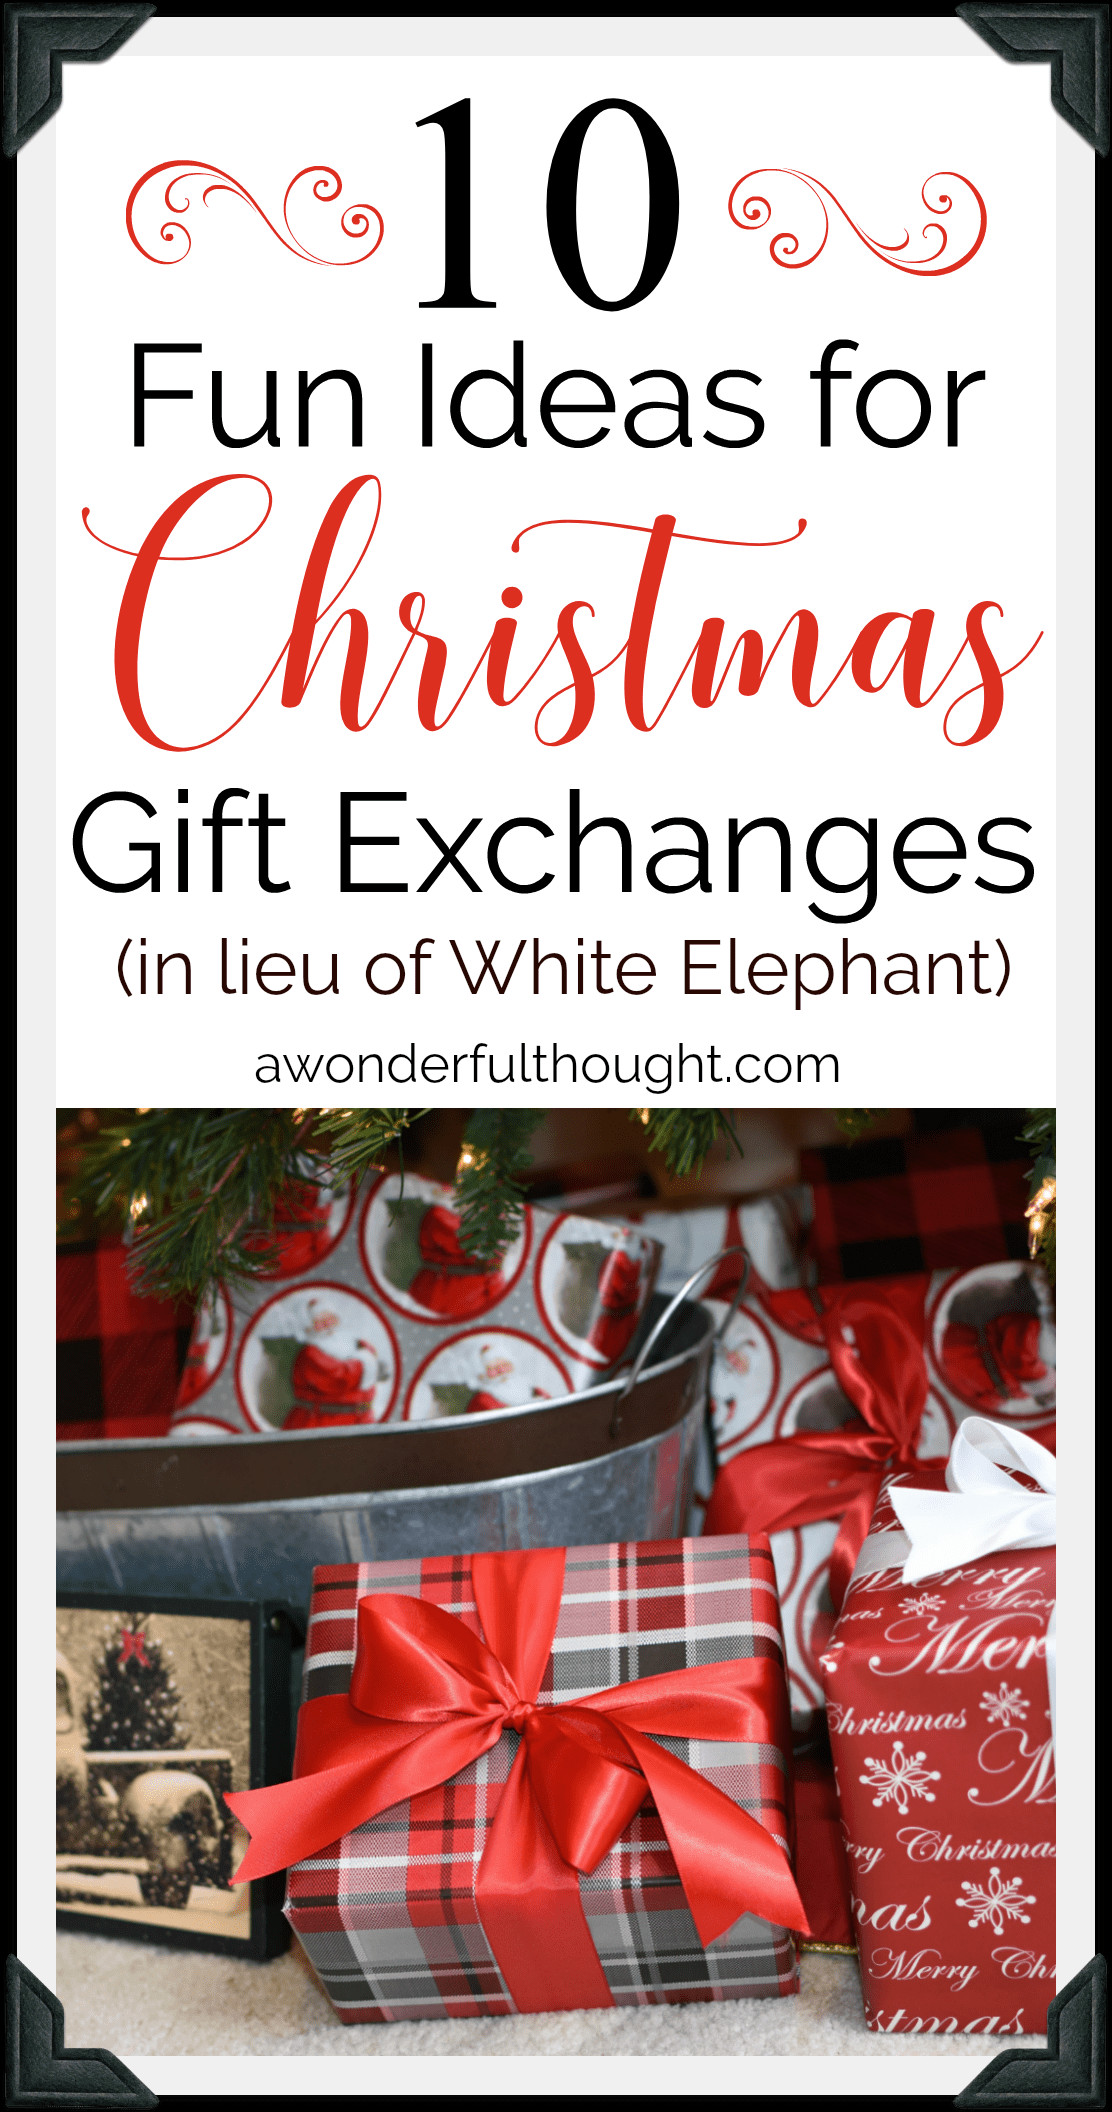 Office Christmas Party Gift Exchange Ideas
 Christmas Gift Exchange Ideas A Wonderful Thought